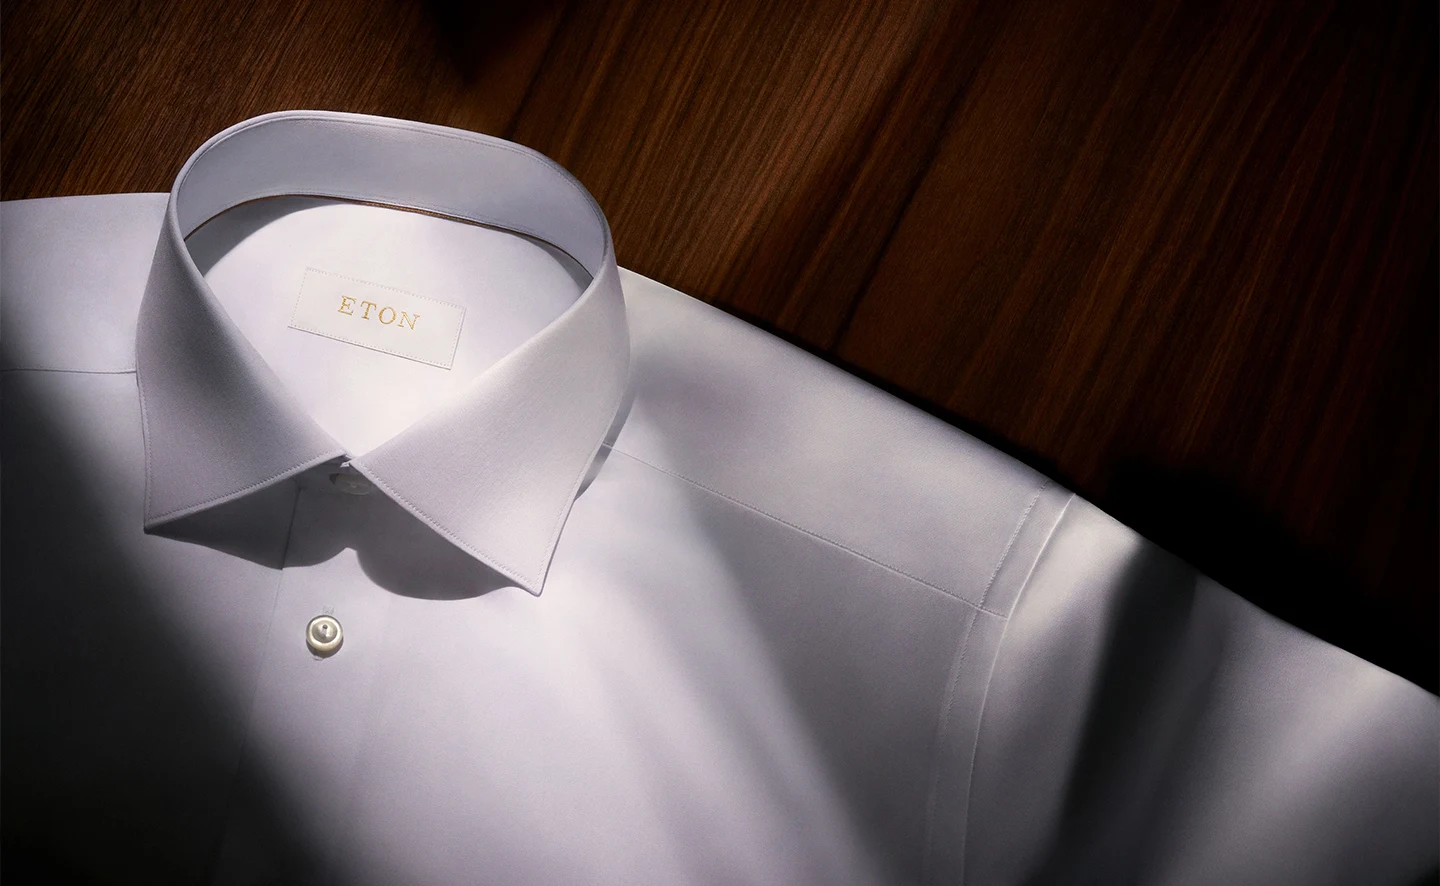 Eton White Elevated Shirt – Our Most Exclusive Shirt